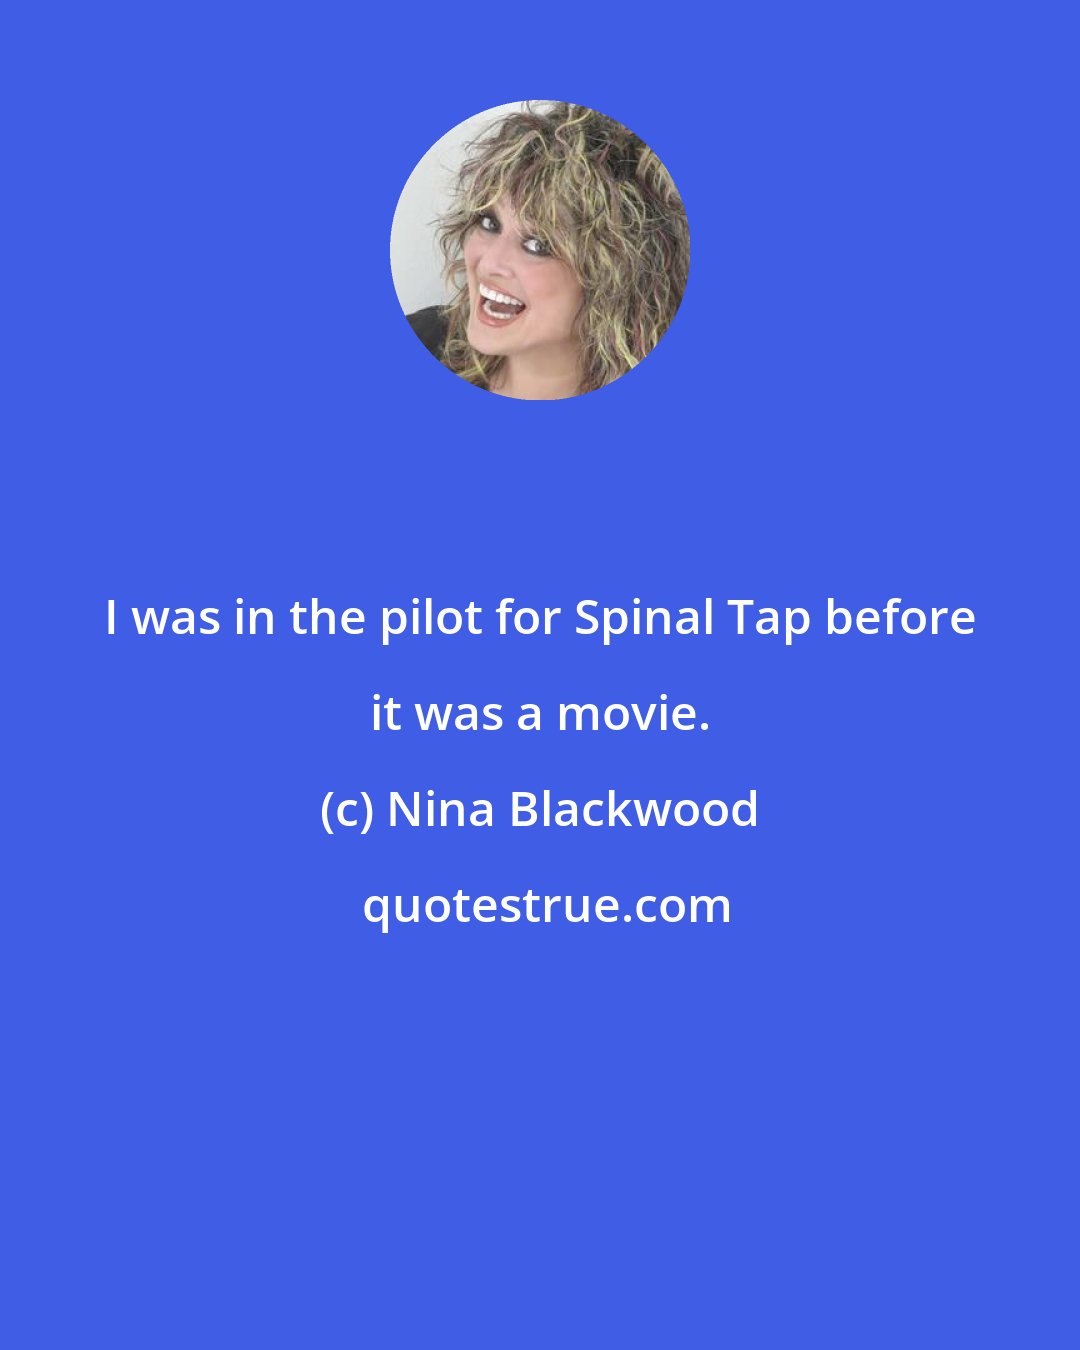 Nina Blackwood: I was in the pilot for Spinal Tap before it was a movie.